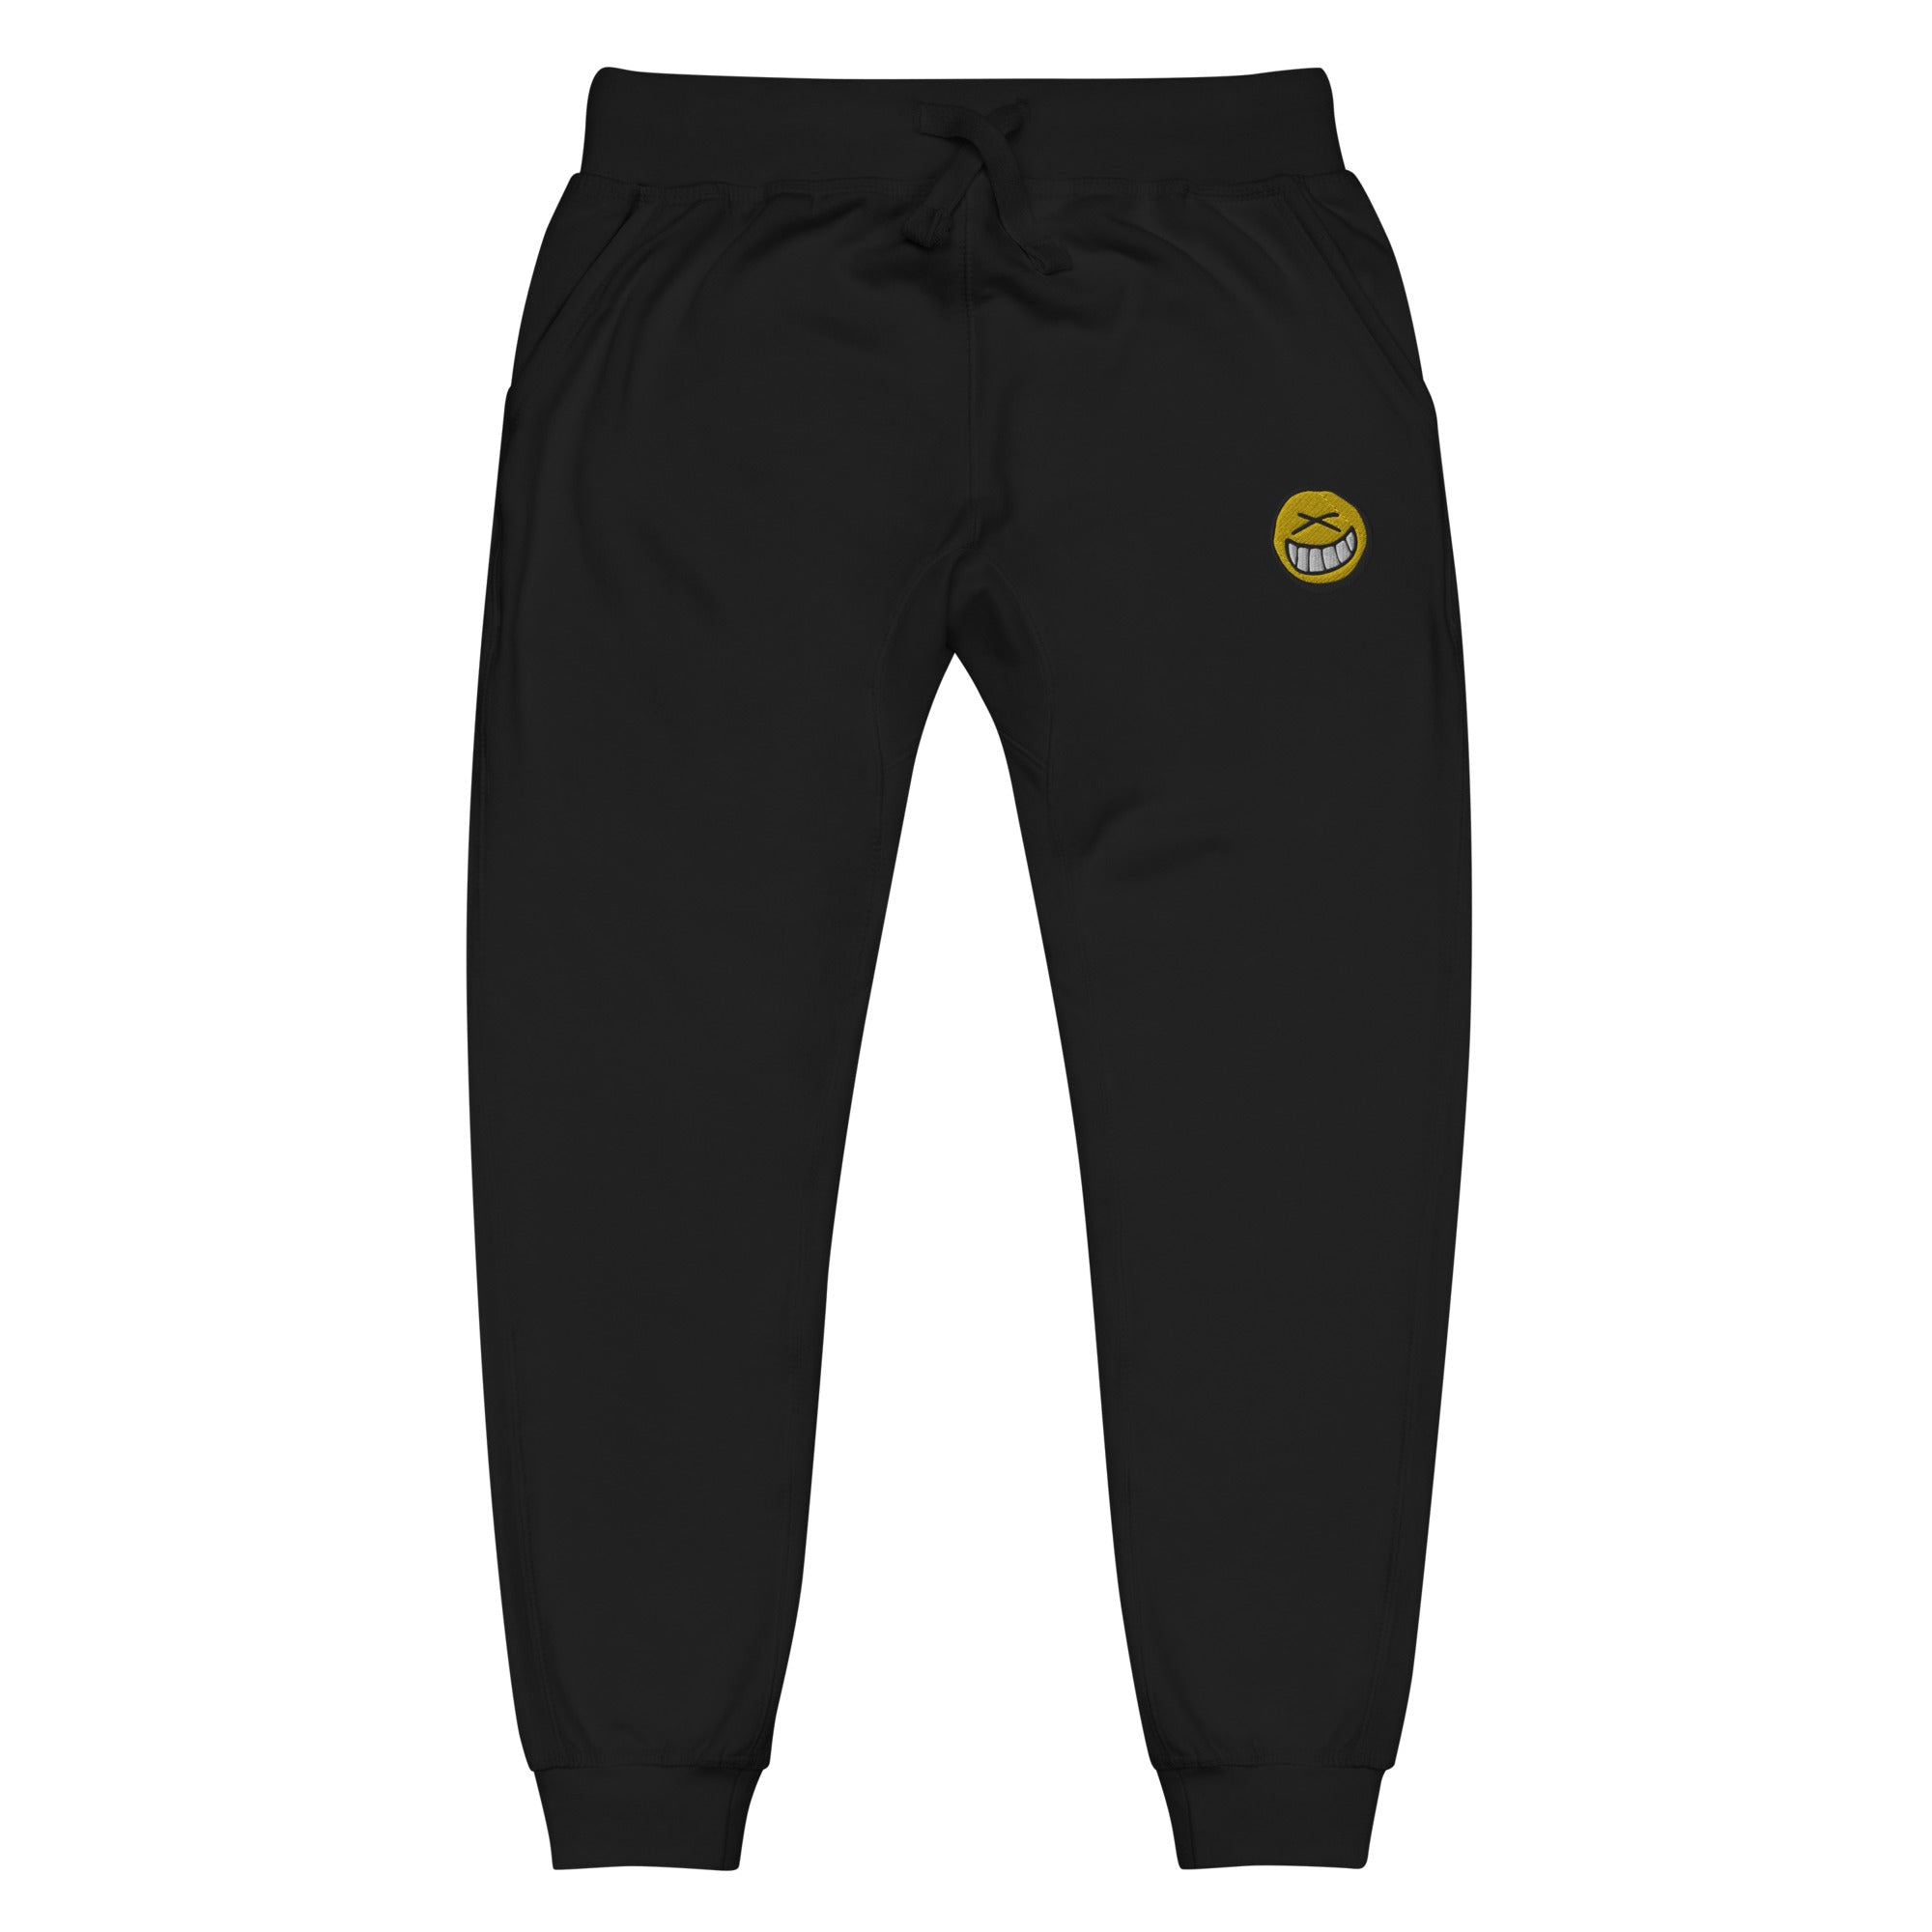 Unisex Smiley Embroidered Sweatpants